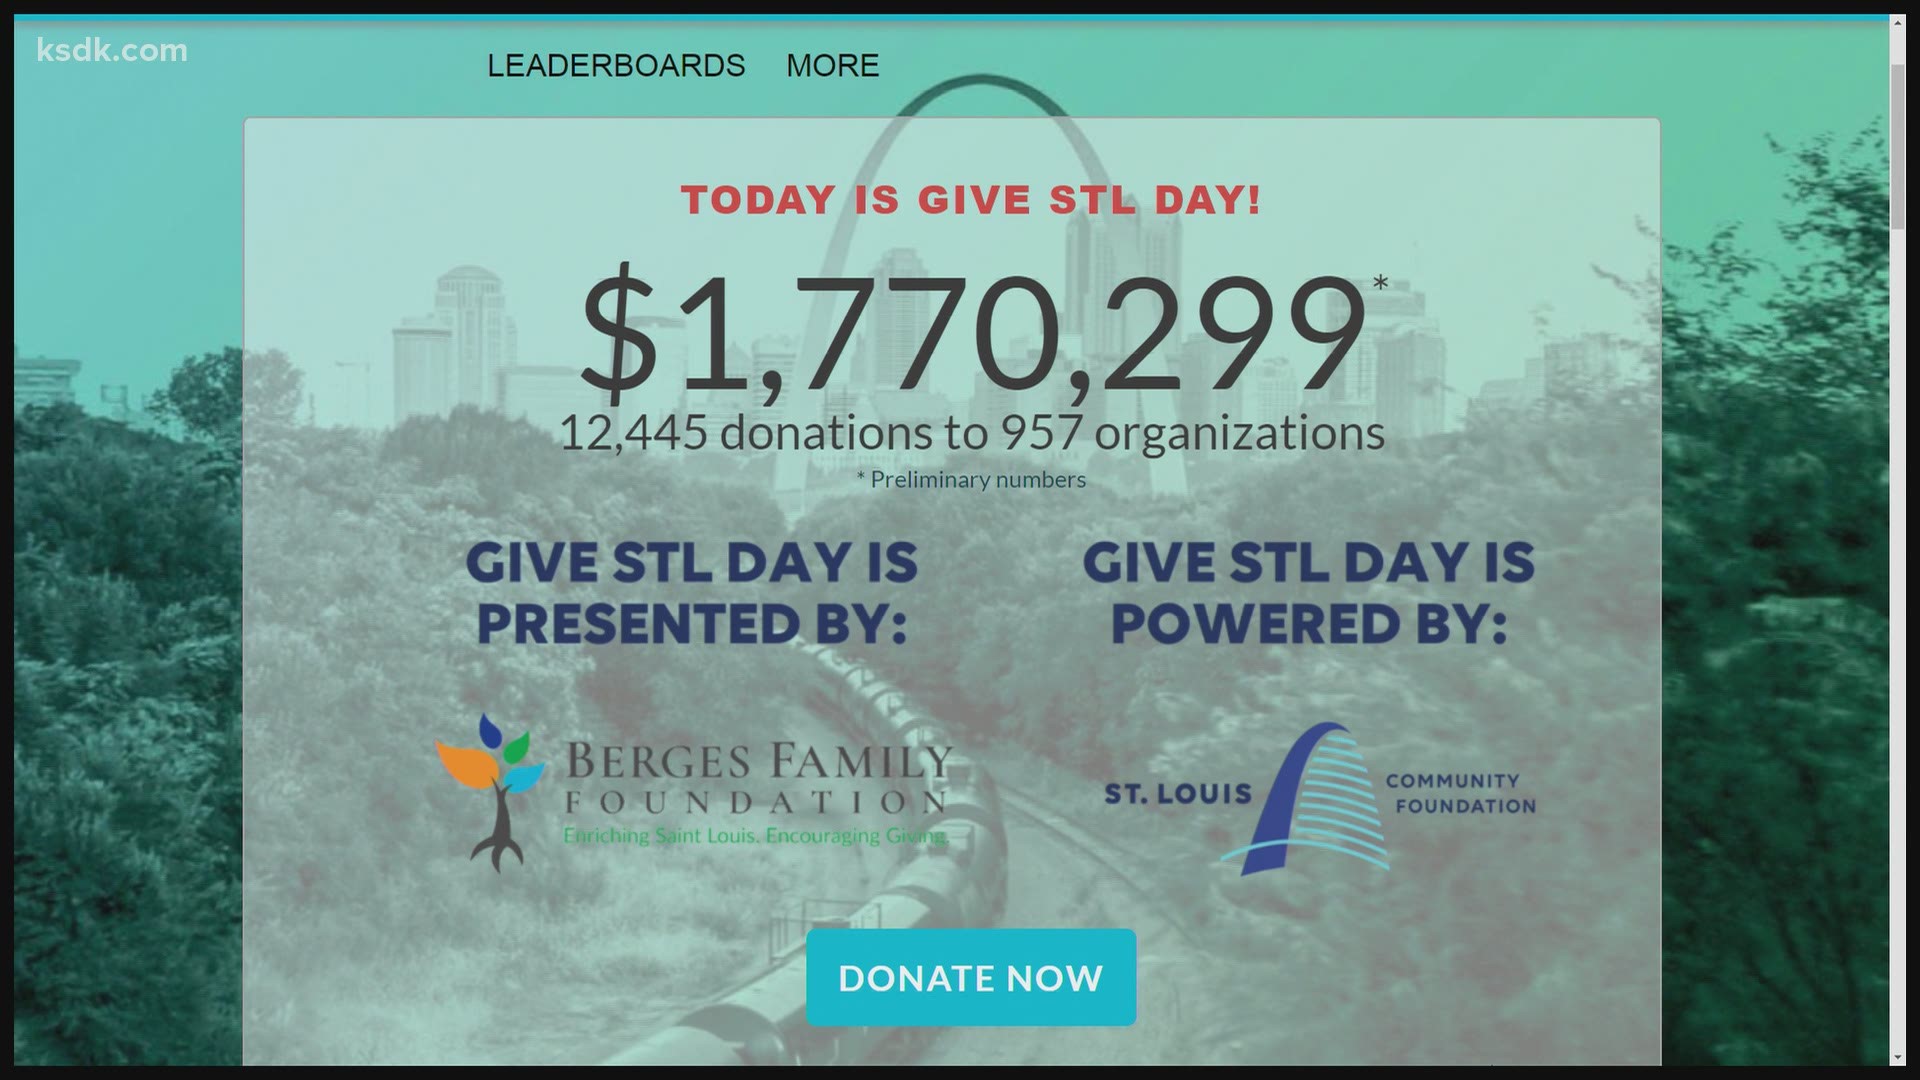 To find a non-profit you would like to support, visit KSDK.com/GIVESTL